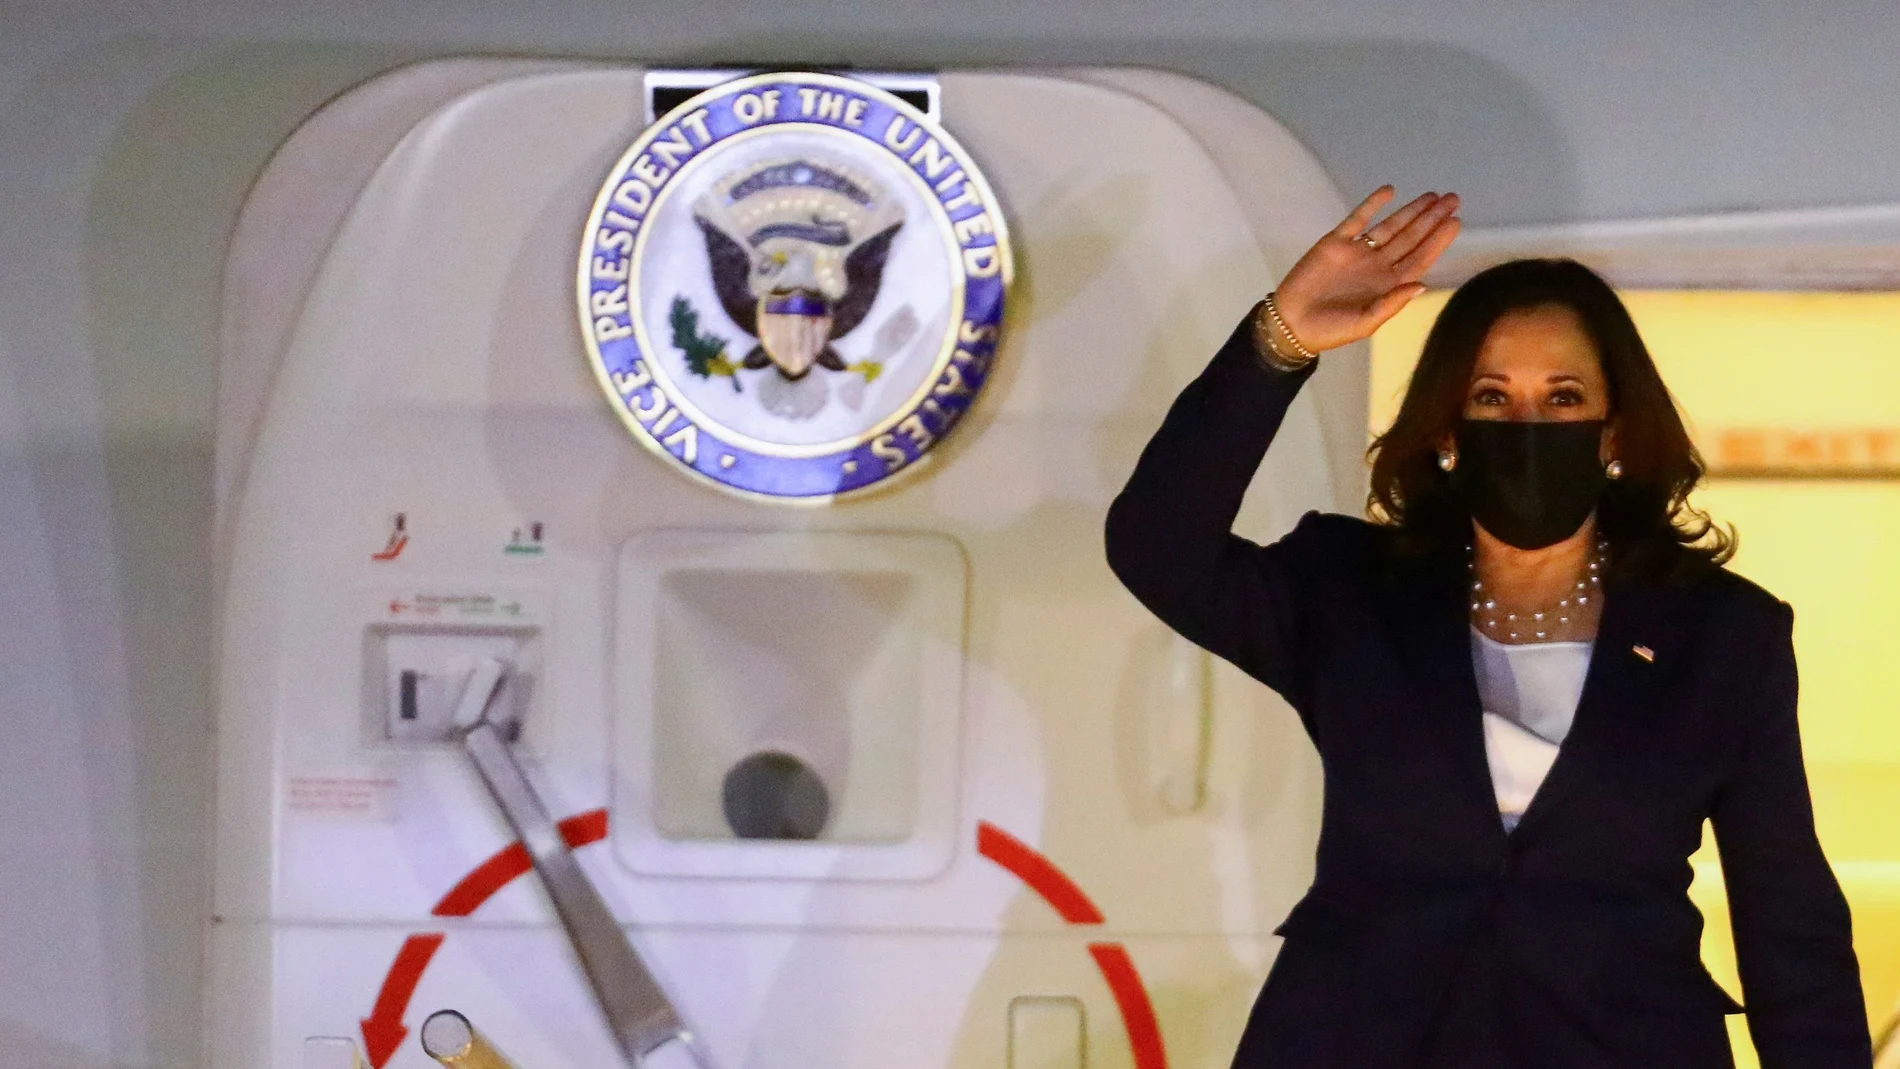 U.S. Vice President Kamala Harris disembarks from Air Force Two as she arrives at Benito Juarez International airport in Mexico City, for her first international trip as Vice President to Guatemala and Mexico, in Mexico June 7, 2021. REUTERS/Edgard Garrido TPX IMAGES OF THE DAY